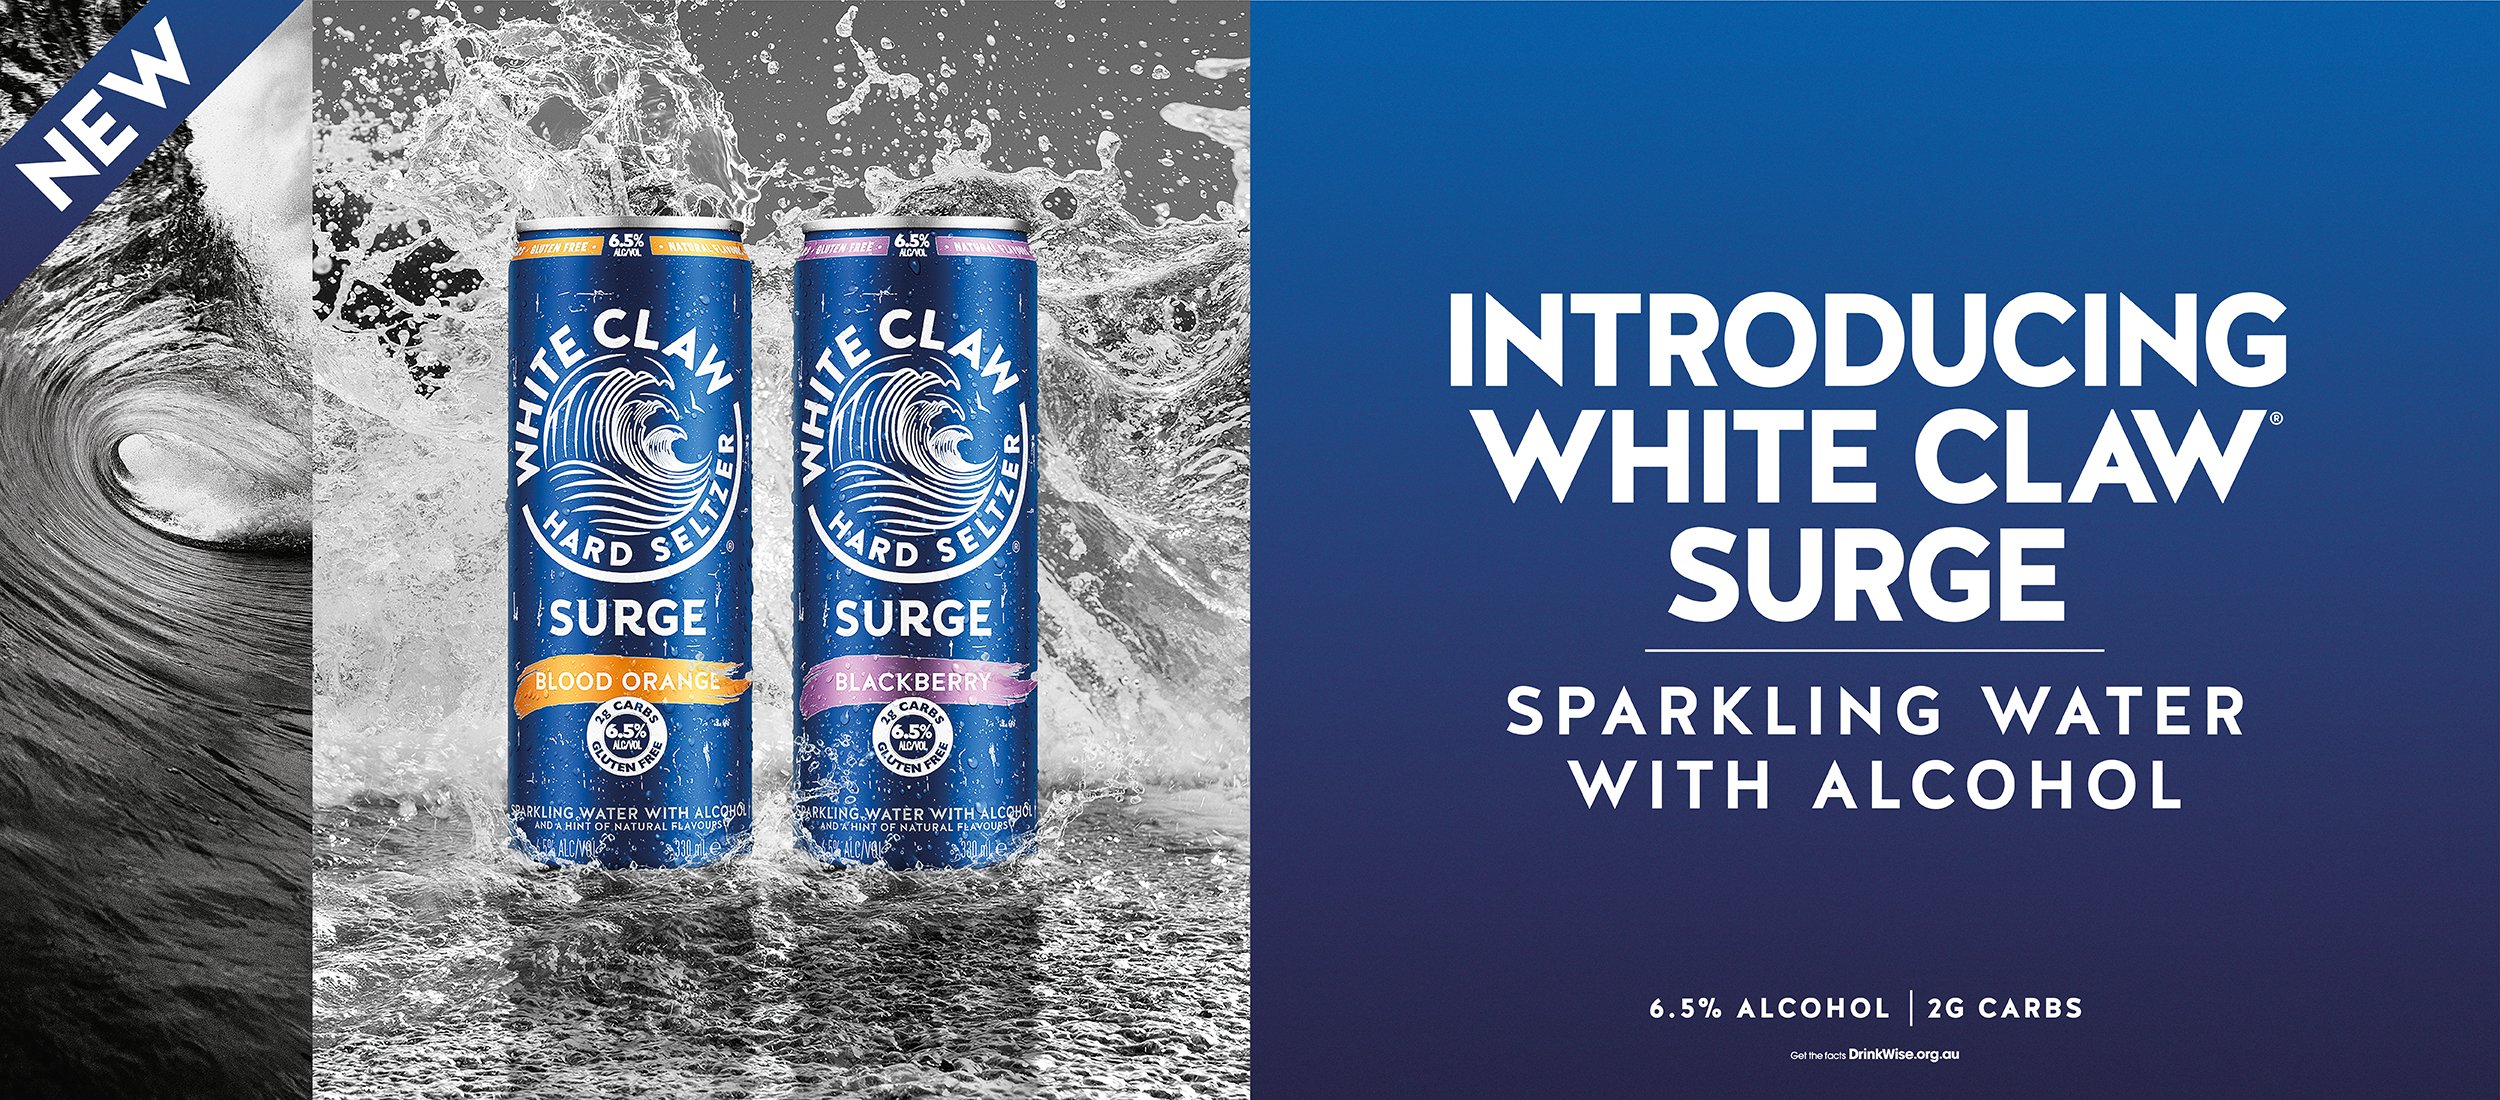 white claw surge stores near me